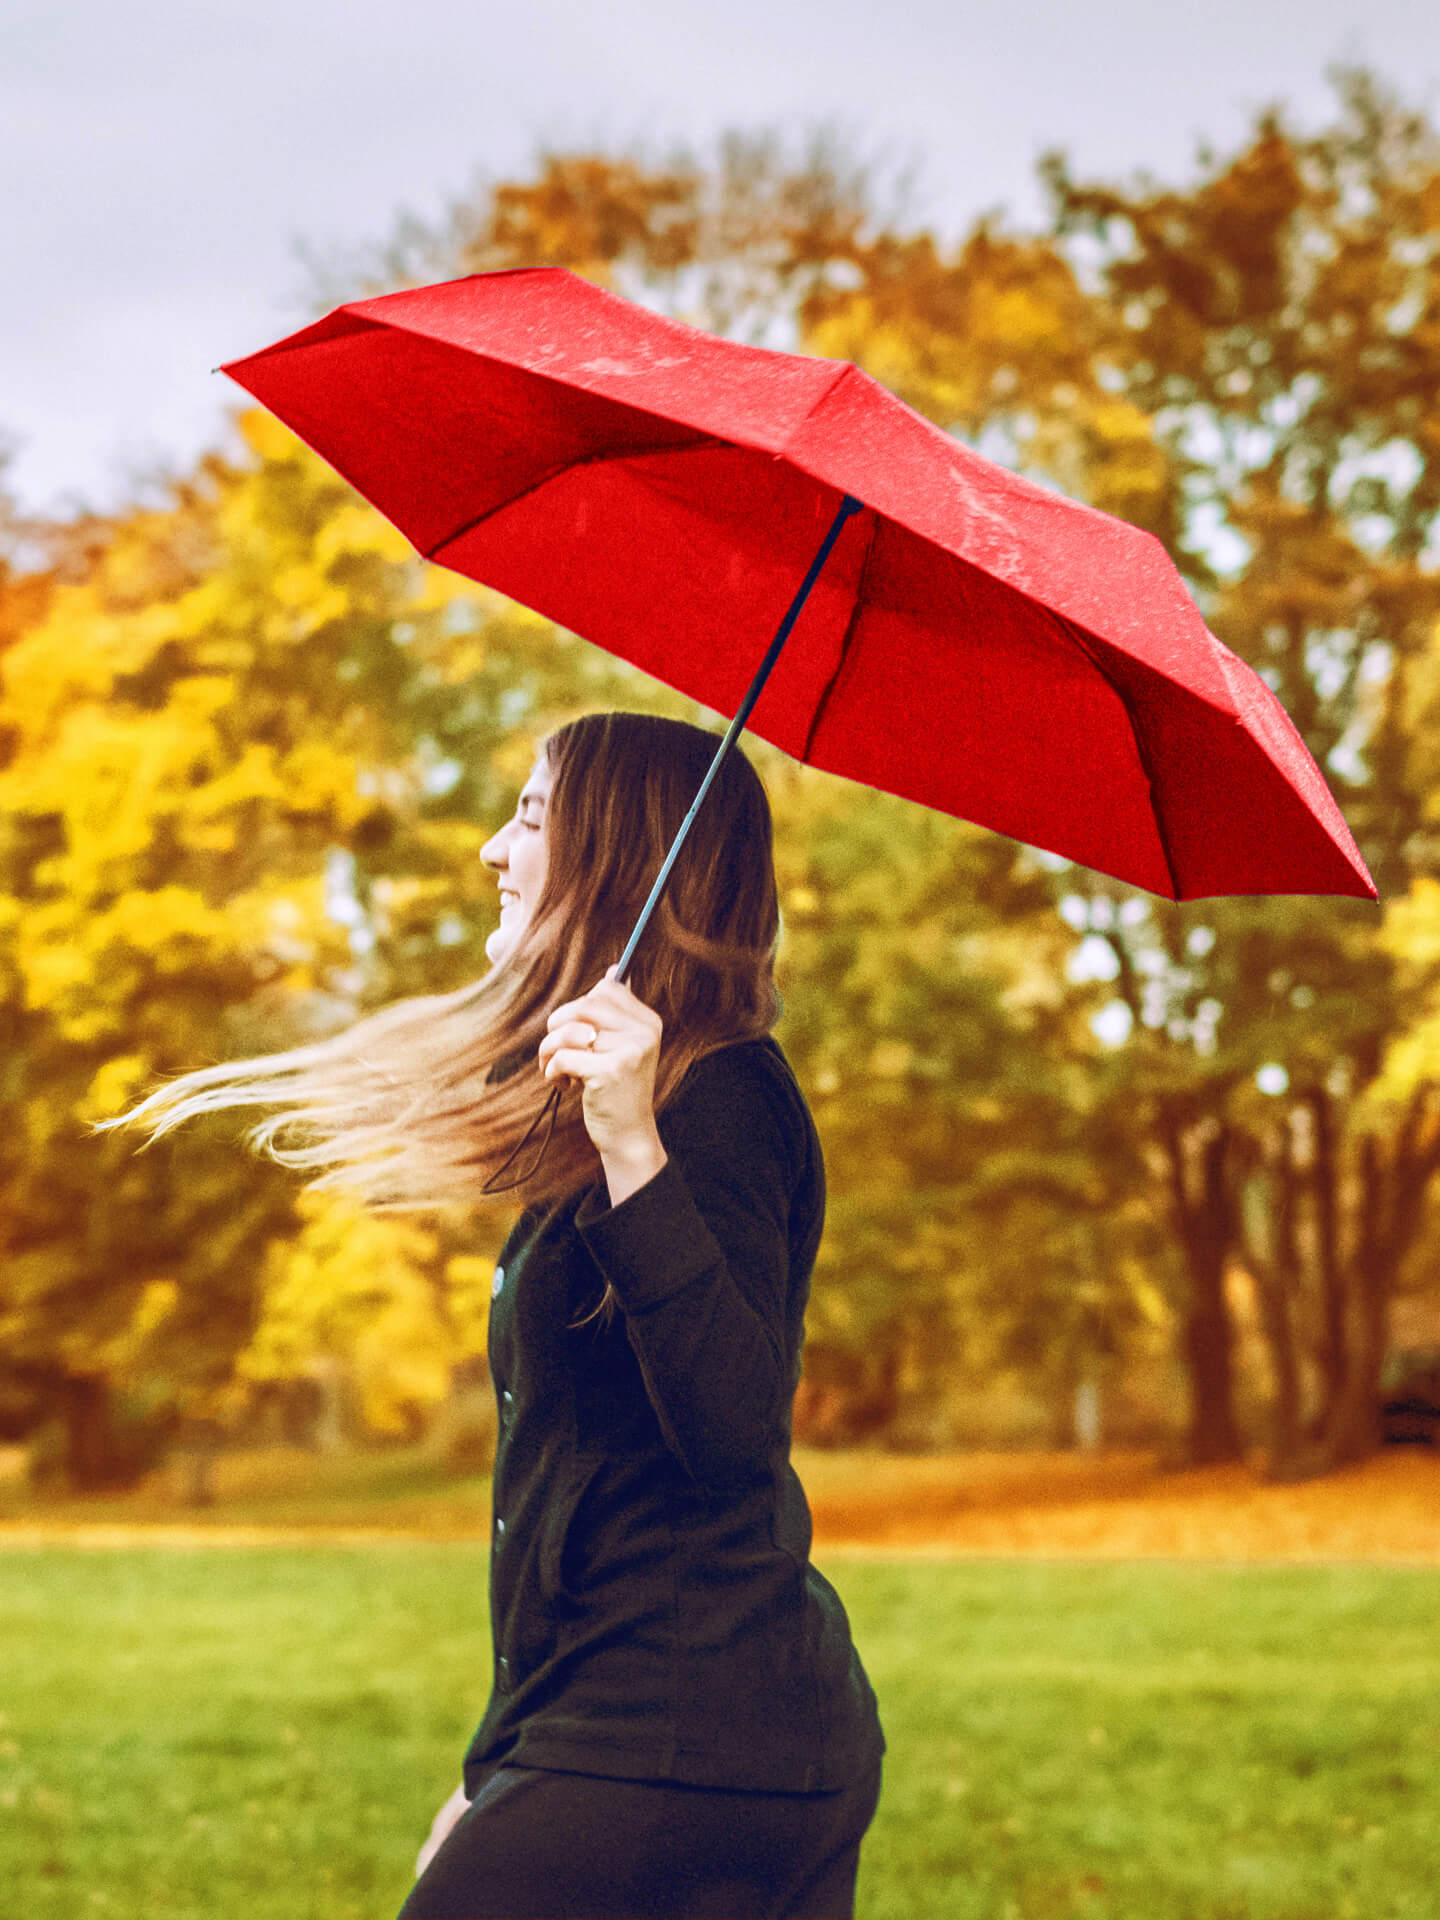 A picture of a woman holding a red umbrella during what seems to be autumn